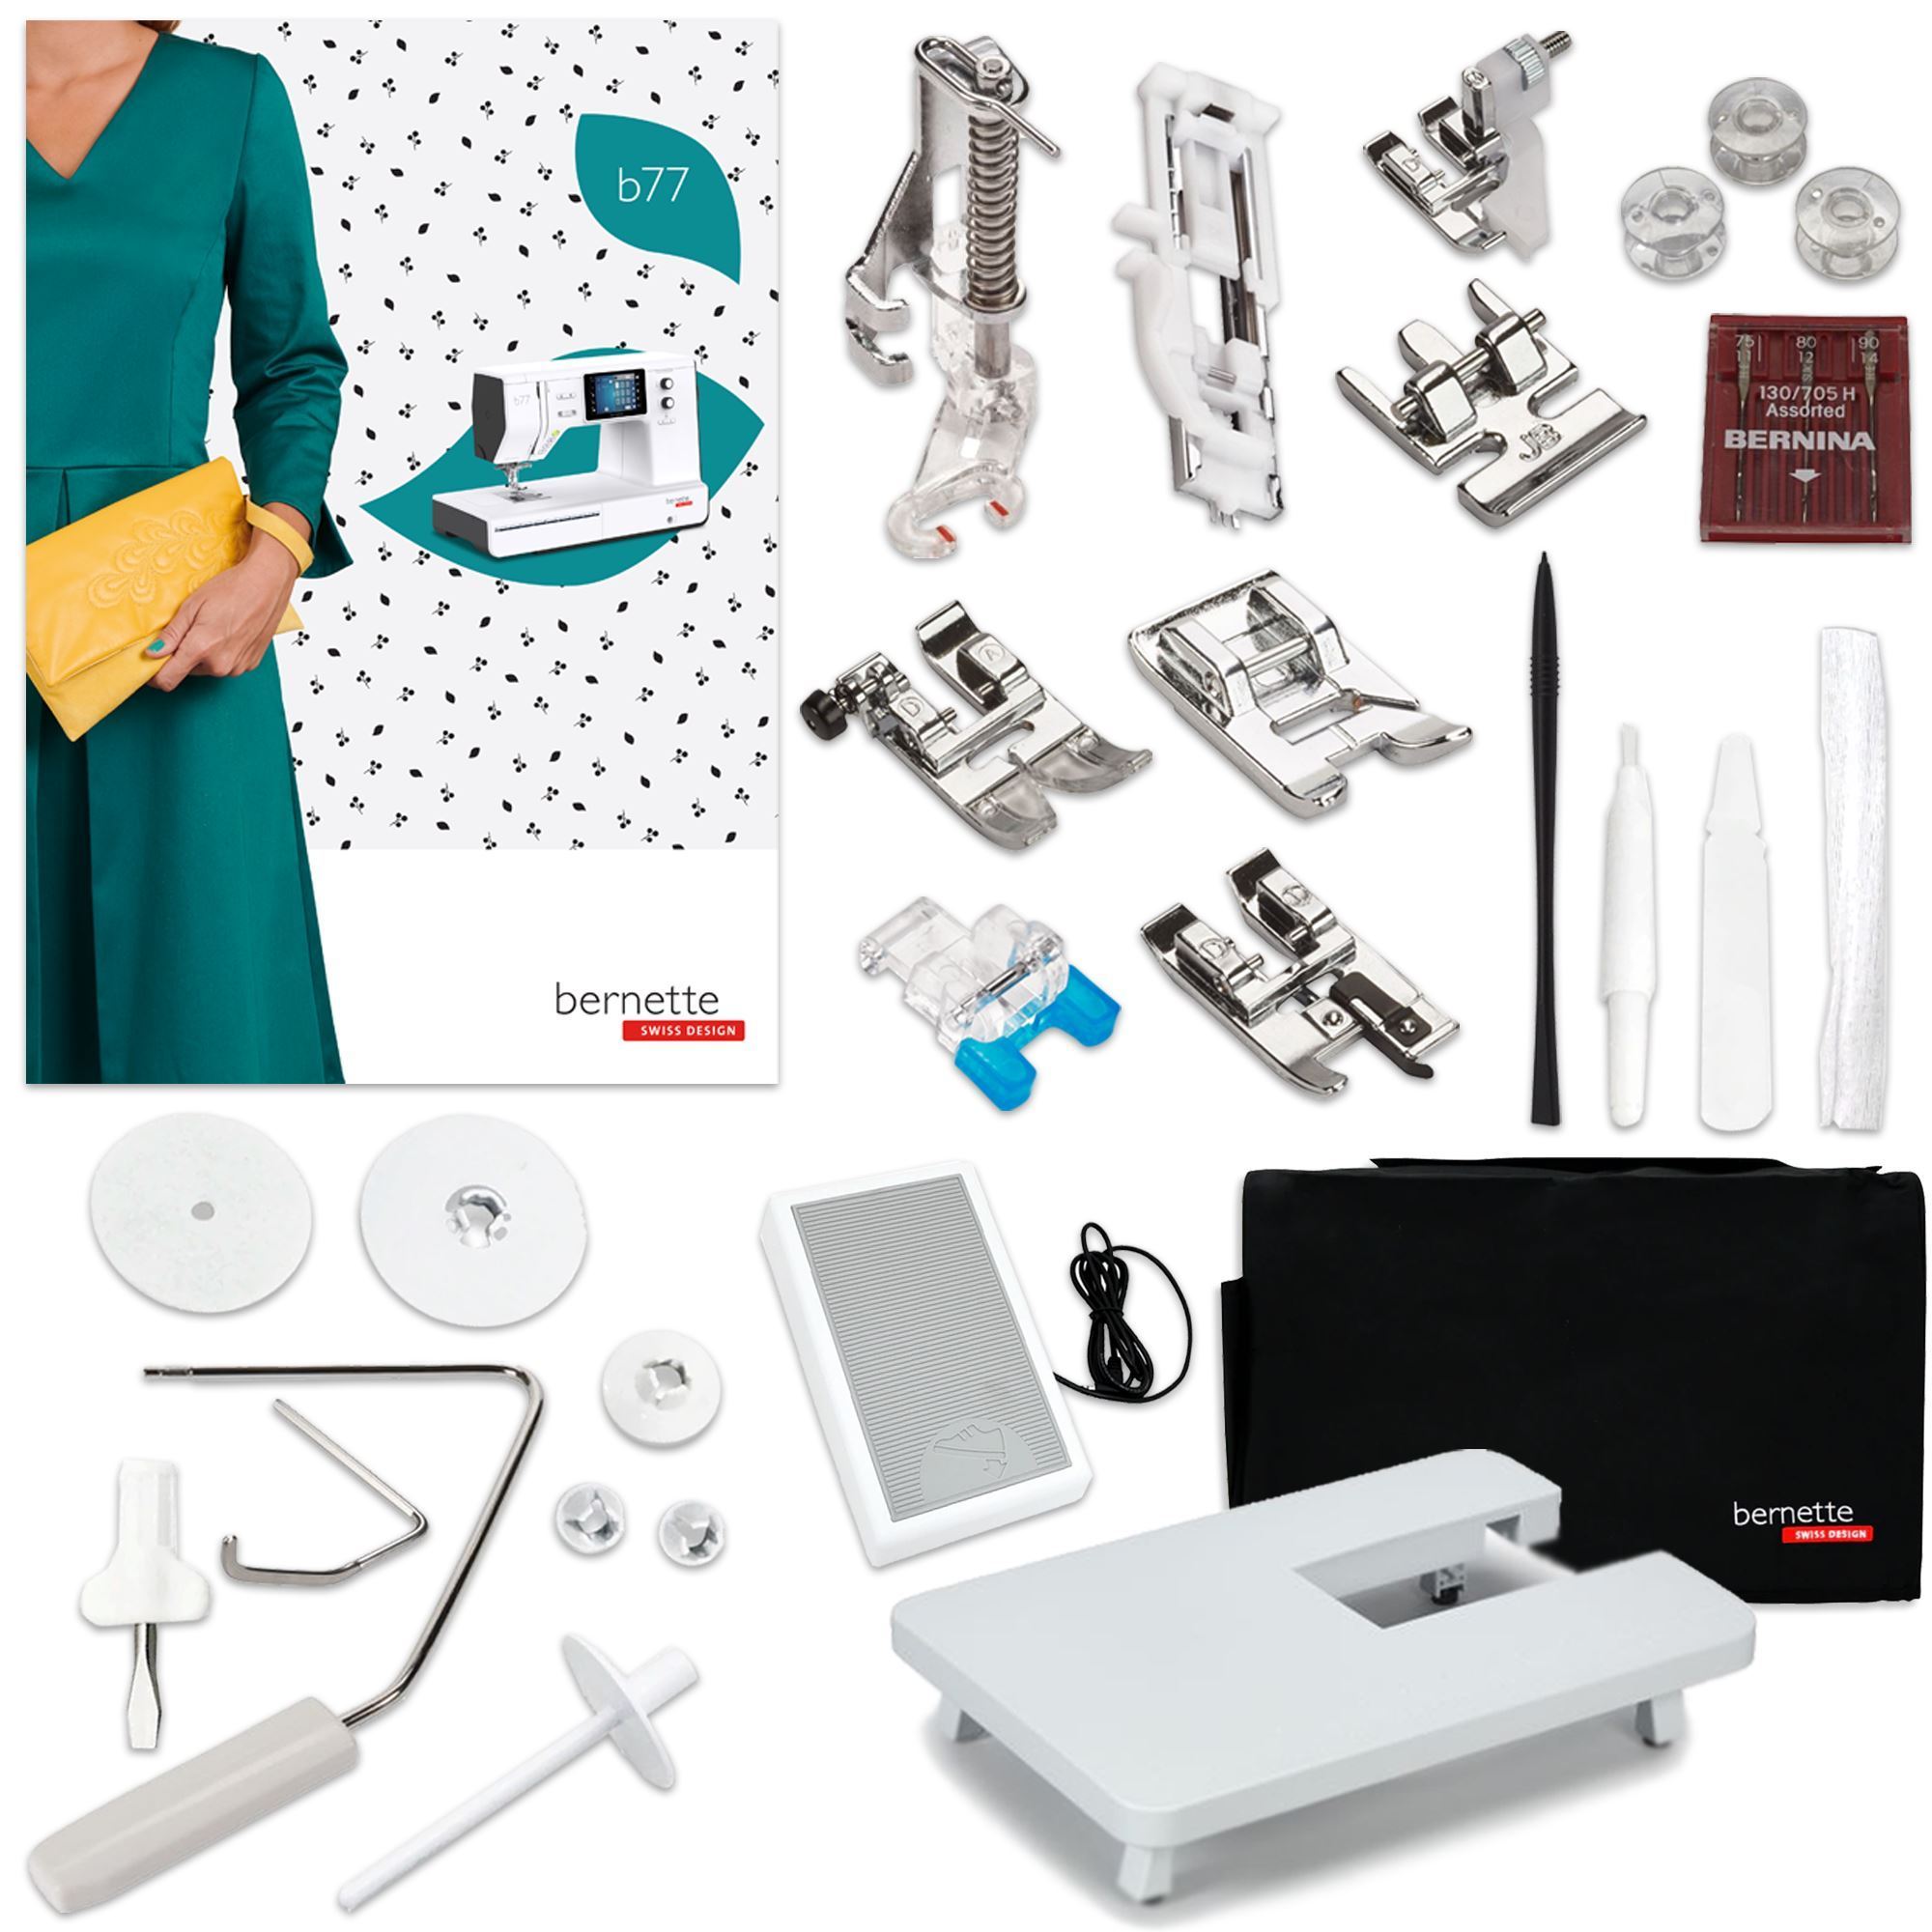 Bernette B77 Deco Sewing & Quilting Machine with Deluxe Embroidery Bundle